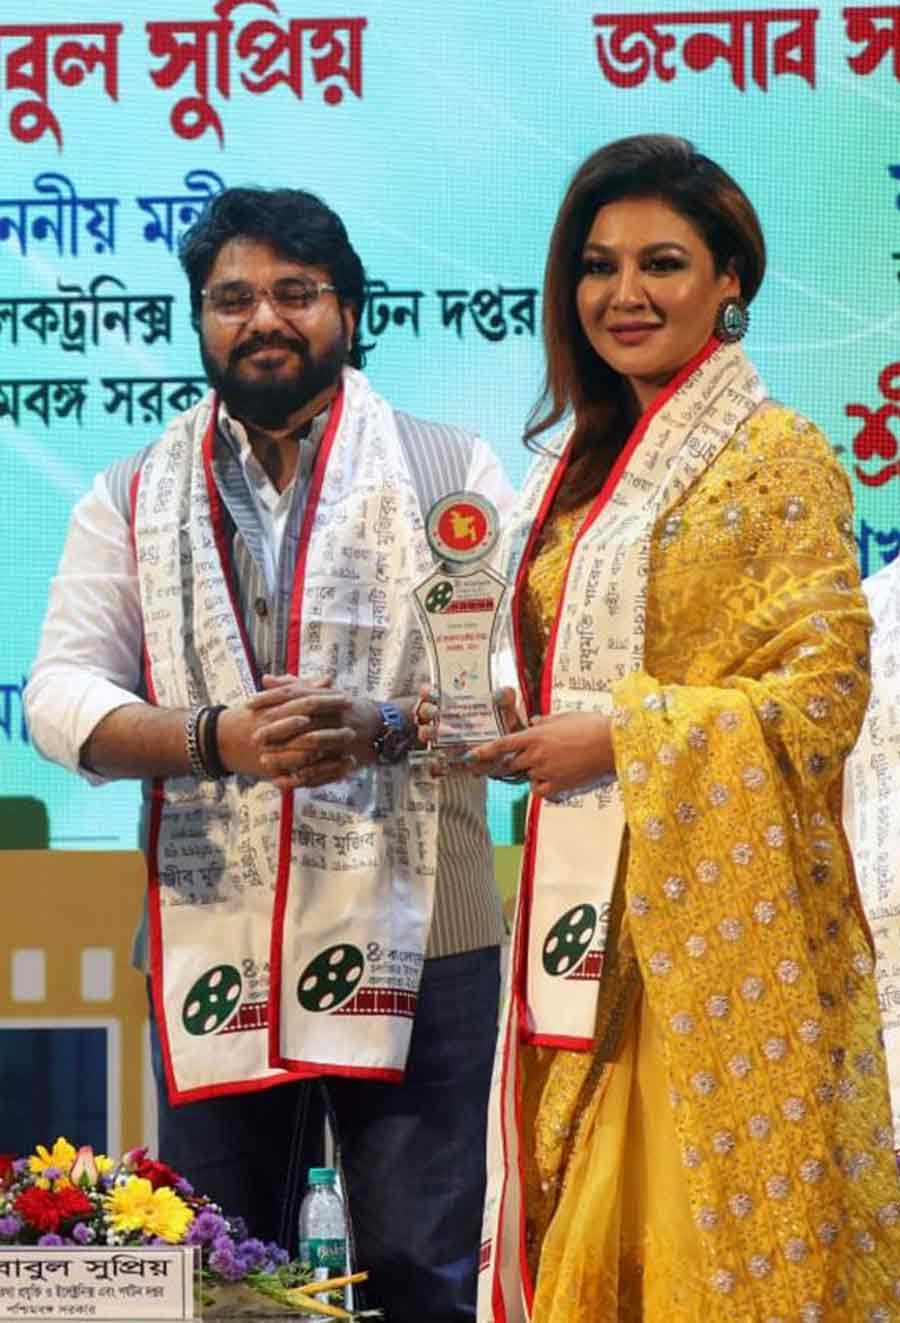 Babul Supriyo, IT & electronics and tourism minister and actress Jaya Ahsan at the inaugural function of the fourth edition of the Bangladesh Film Festival at Rabindra Sadan on Saturday. Bangladesh Deputy High Commissioner Andalib Elias said 37 films and documentaries from the neighbouring country will be screened at the five-day event which will conclude on November 2